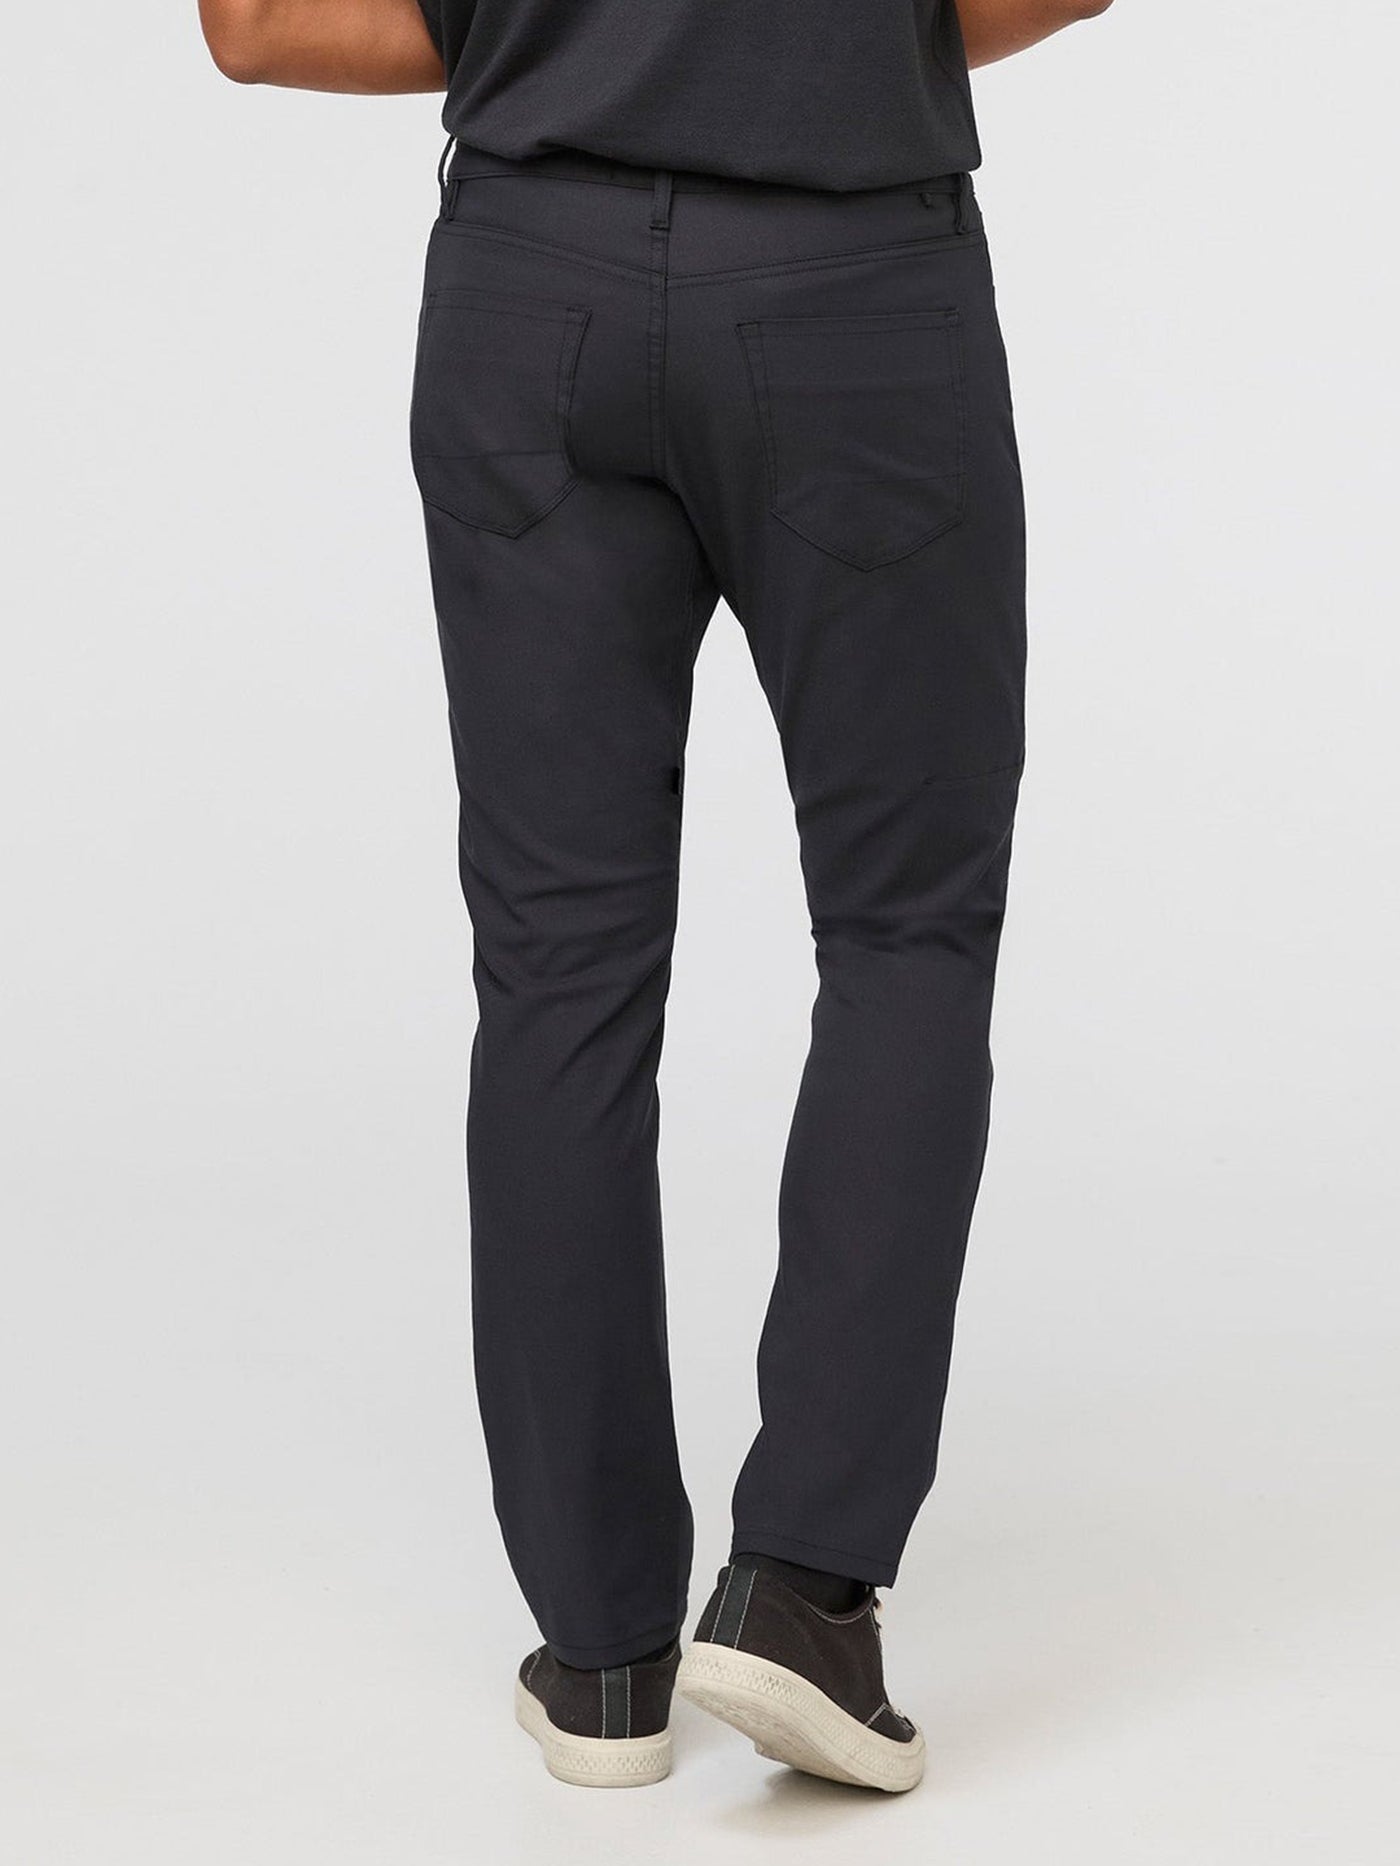 Duer NuStretch Relaxed 5 Pocket Black Pants